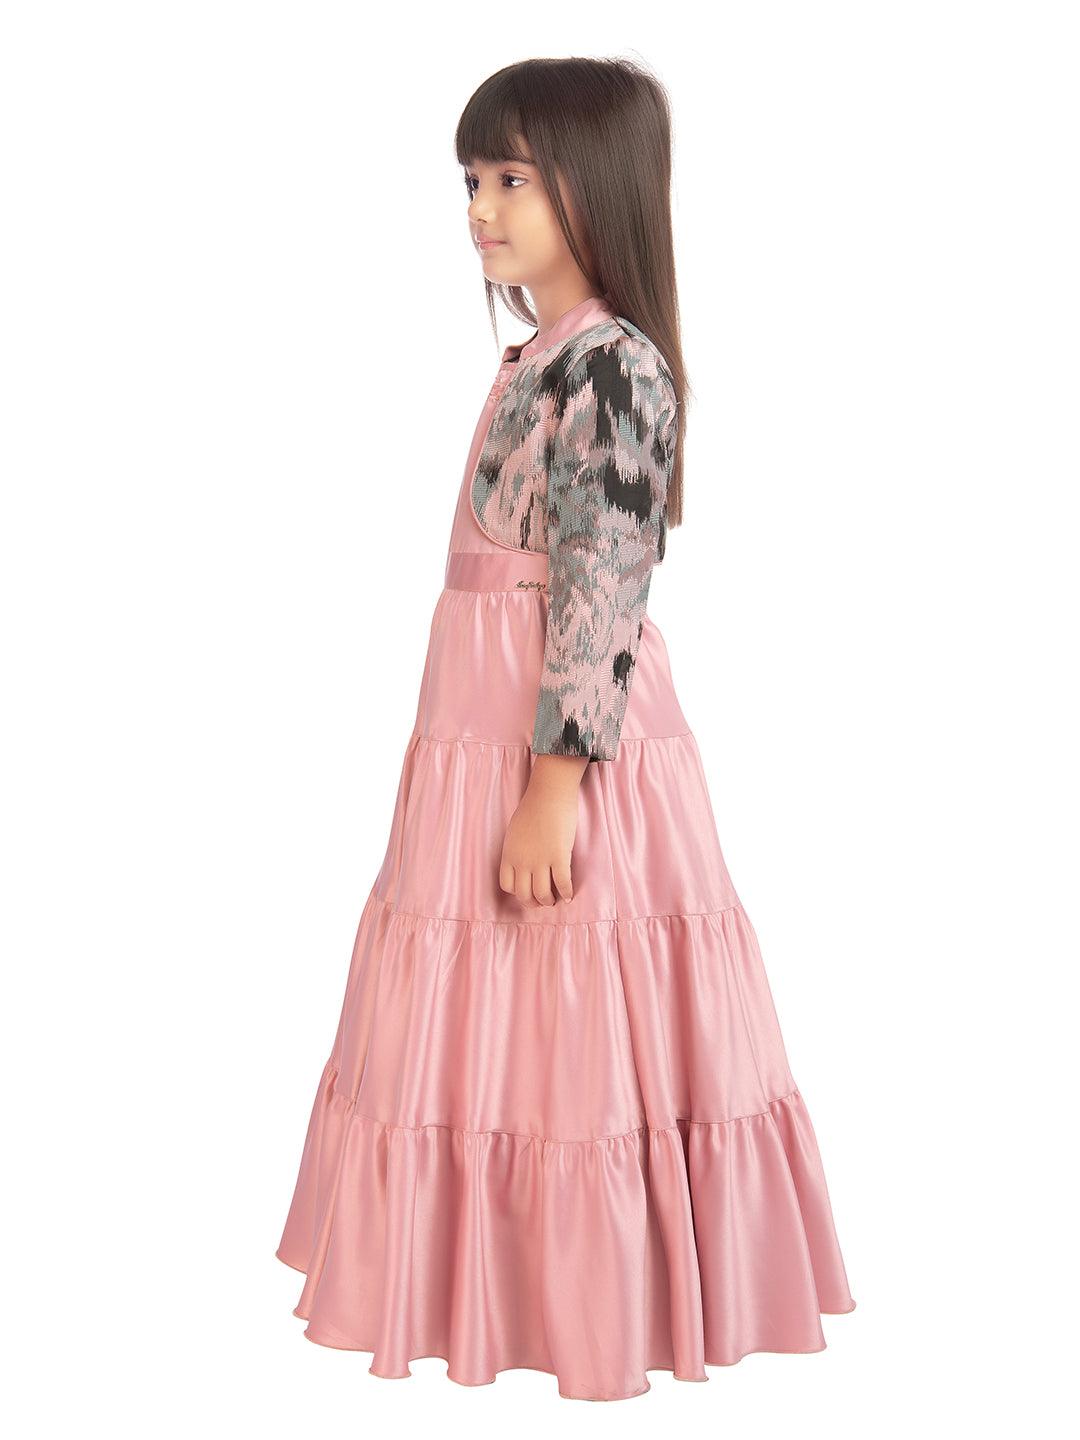 Solid Pattern Pink Colored Gown - 2070 Pink - TINY BABY INDIA shop.tinybaby.in